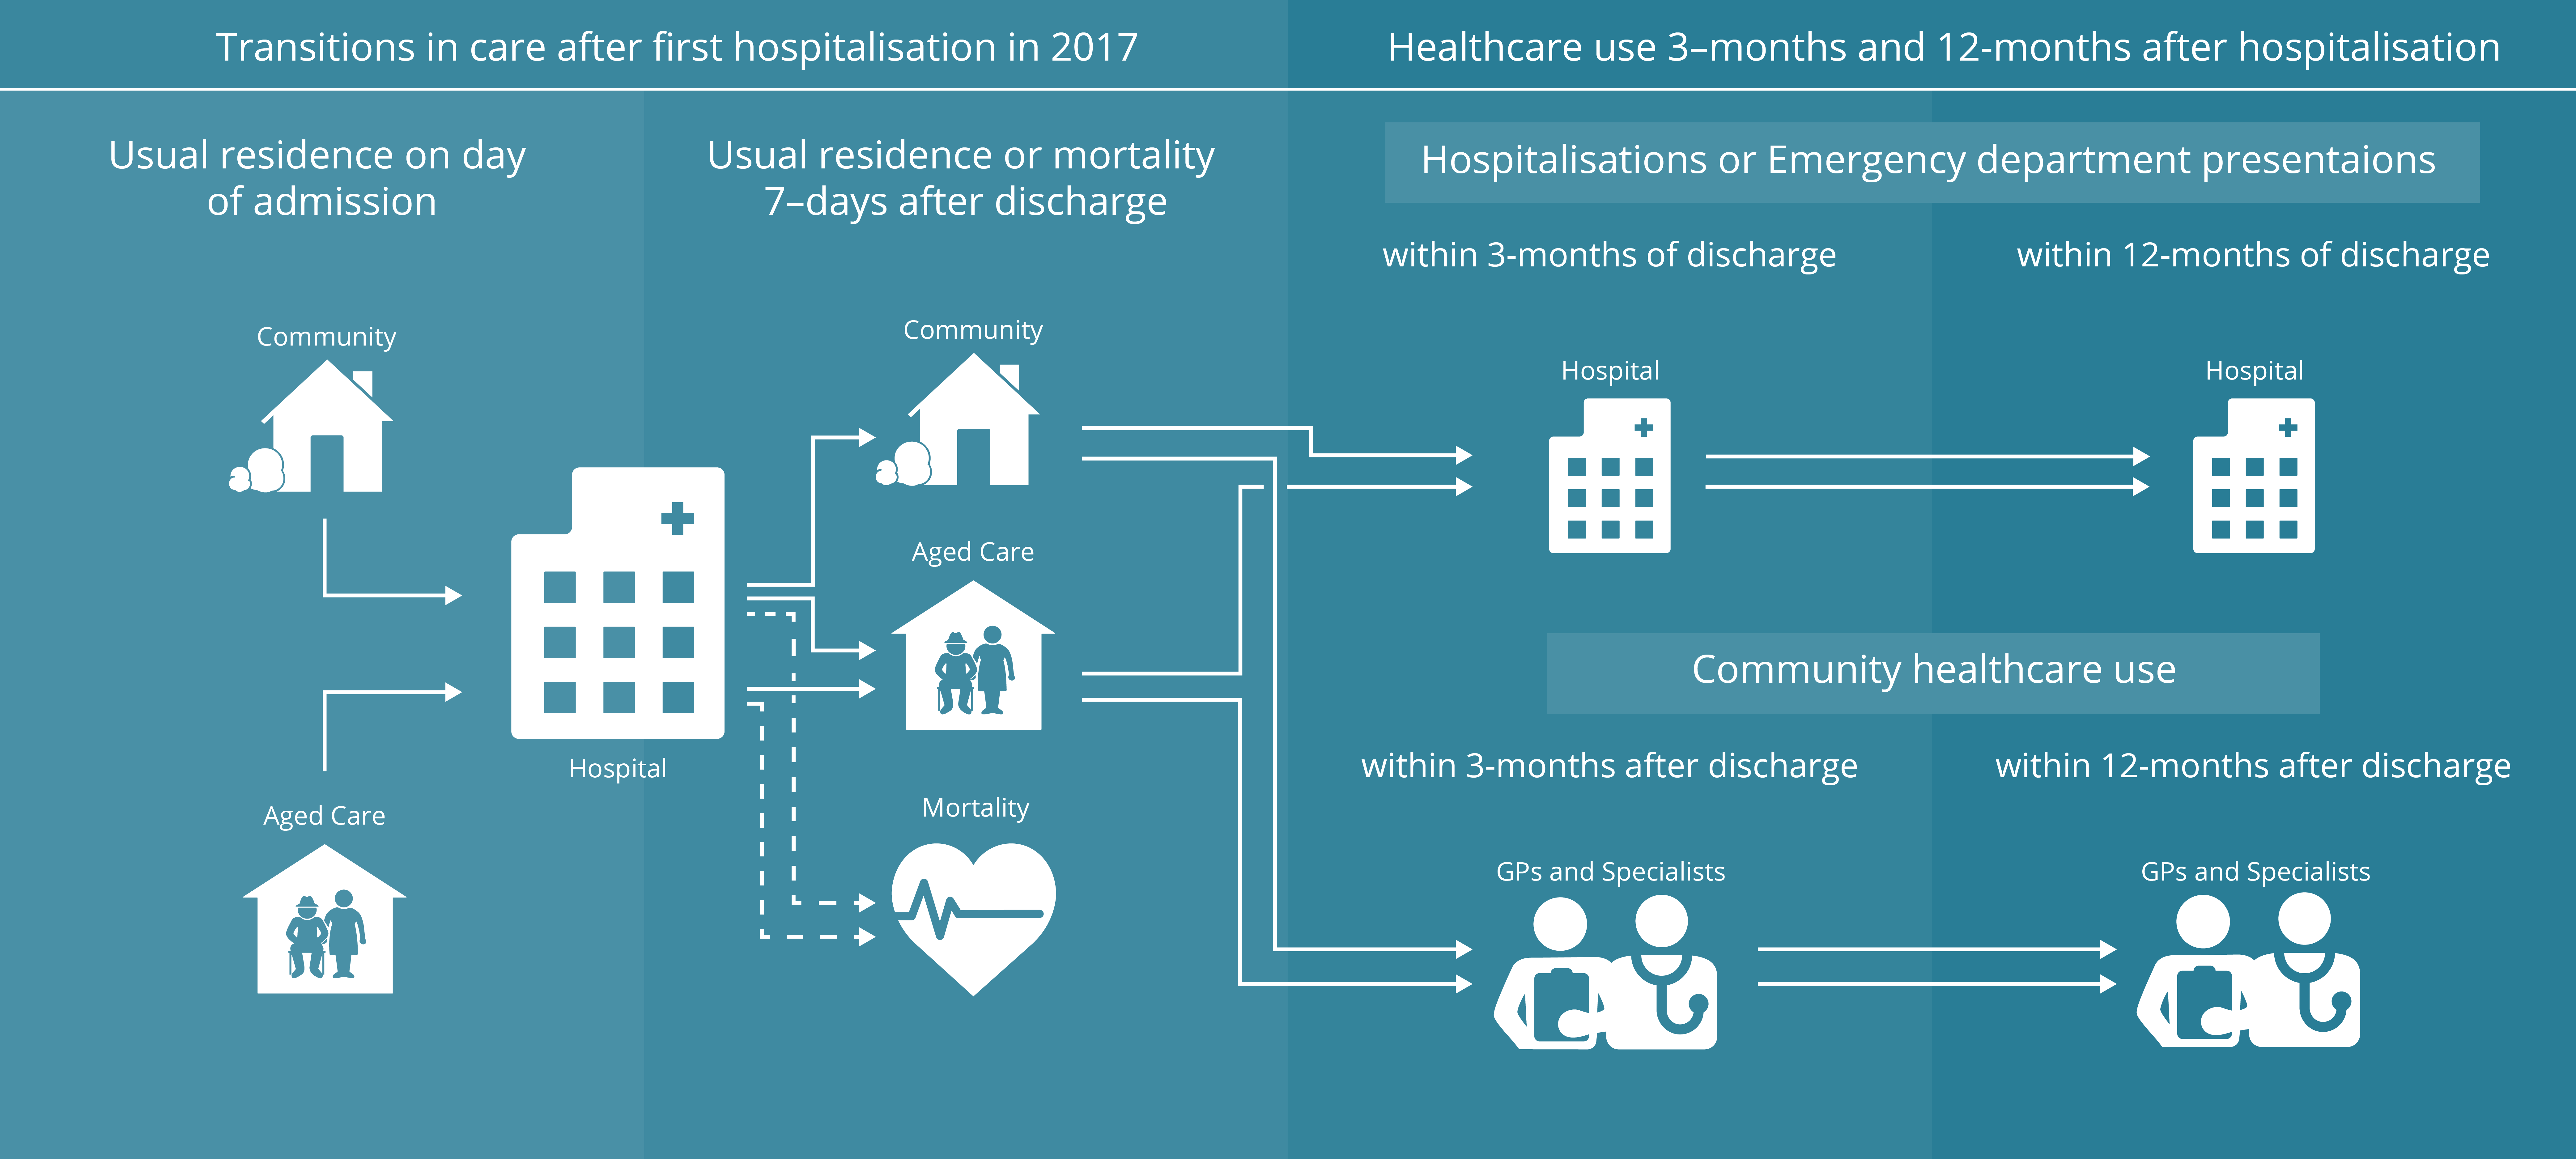 The figure is a conceptual diagram demonstrating that healthcare use 3-months and 12-months after hospitalisation was examined by people's transition between their usual residence before hospitalisation (on the day of admission) and 7-days after discharge.